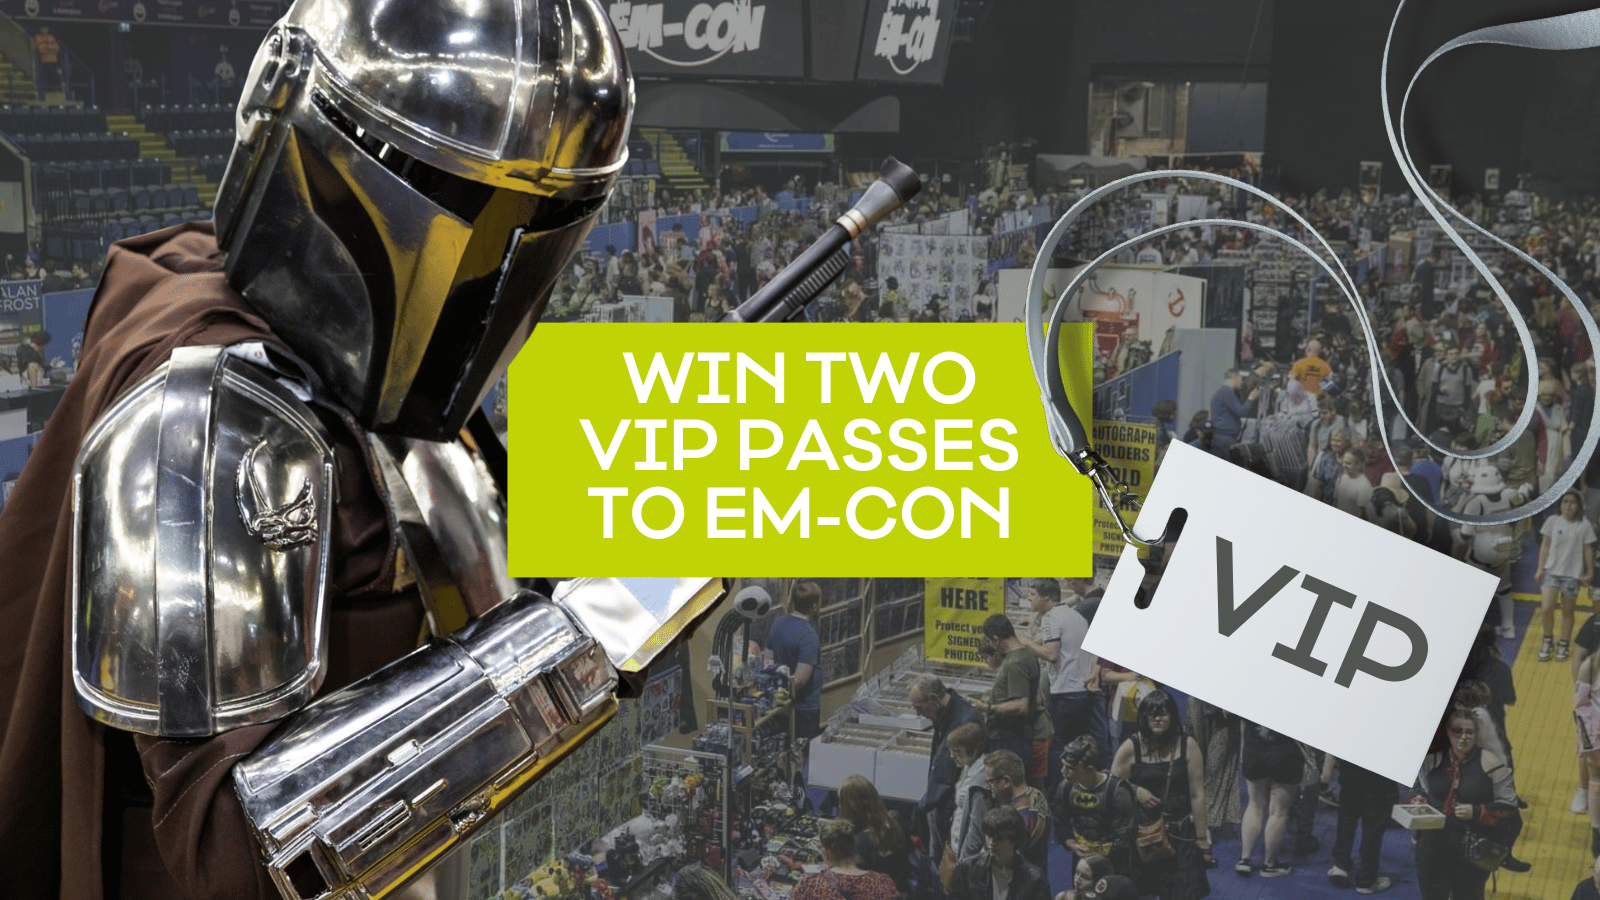 Graphic for the competition including a photo of the event hosted in the arena bowl, as well as a cut out of a cosplayer dressed as the Mandalorian and a mocked up 'VIP' pass